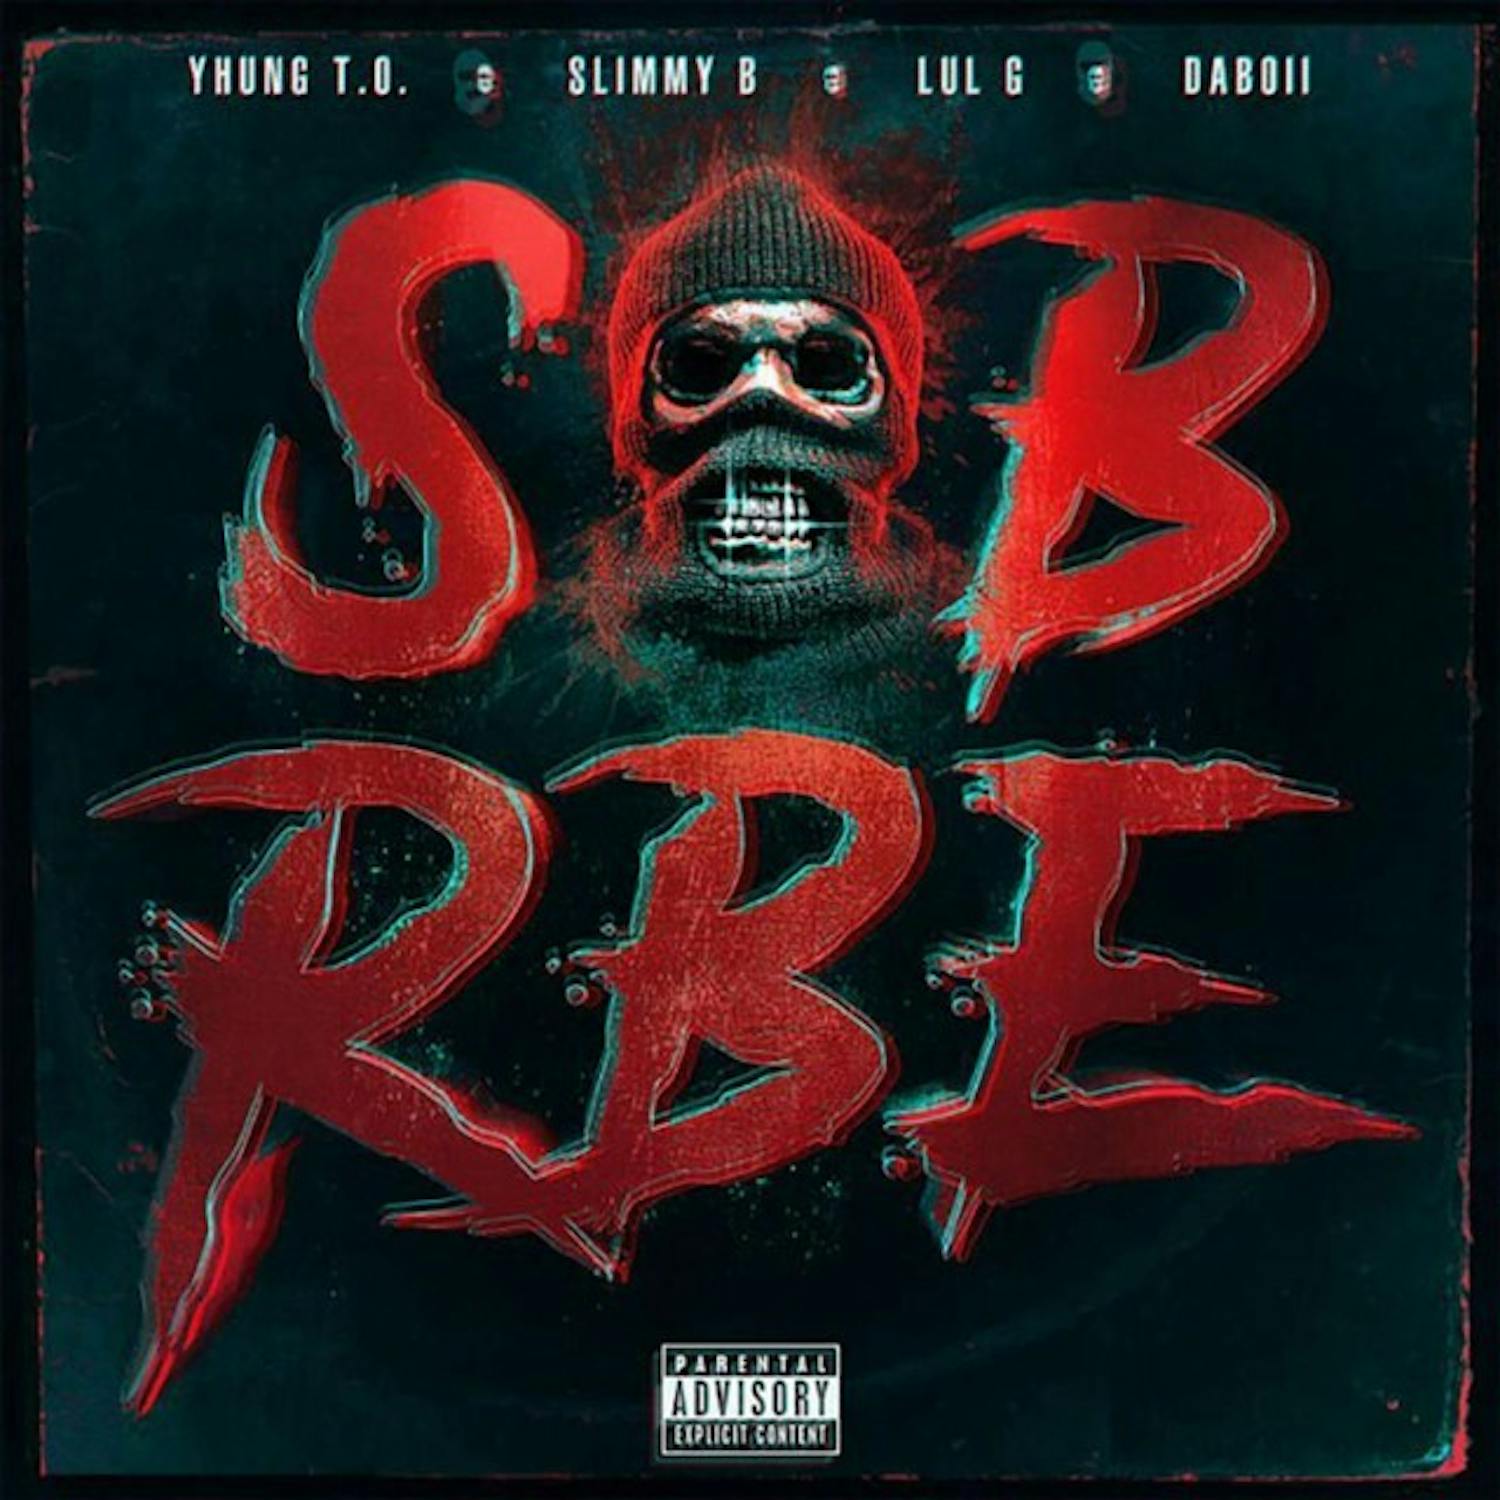 Problems with staying on beat and mundane raps keep SOB's album from being a stronger debut.